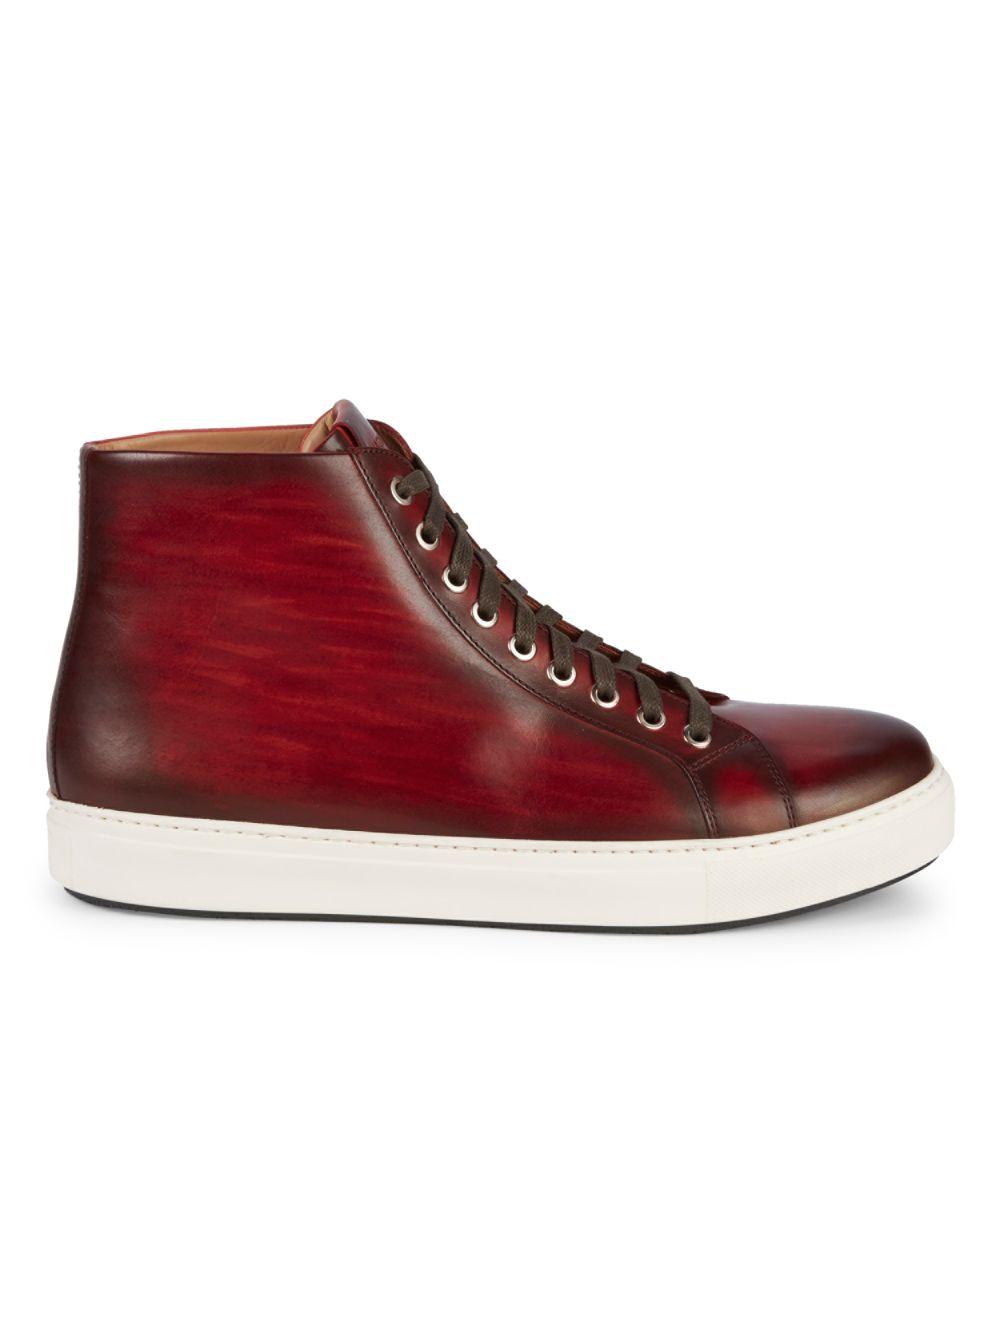 Magnanni Leather 'brando' High Top Sneaker in Red for Men - Save 14% - Lyst